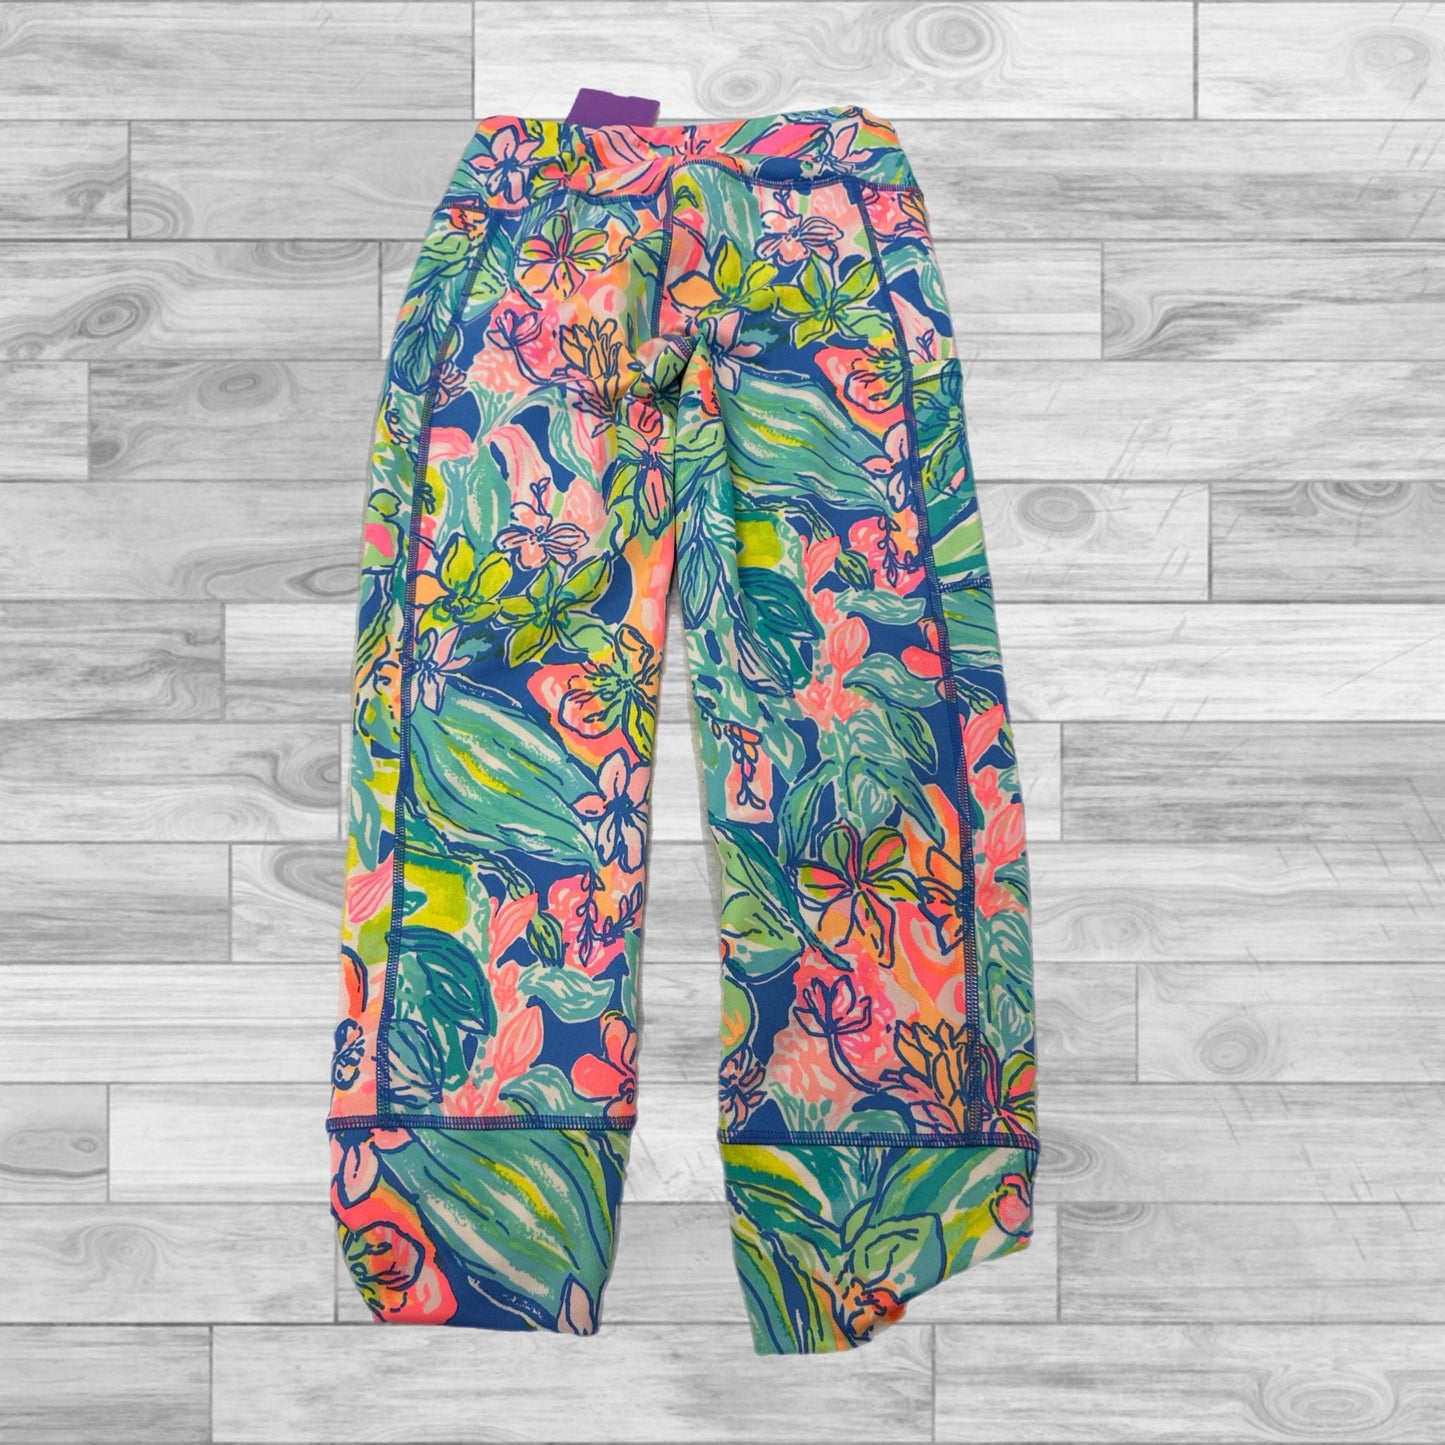 Multi-colored Athletic Capris Lilly Pulitzer, Size Xs